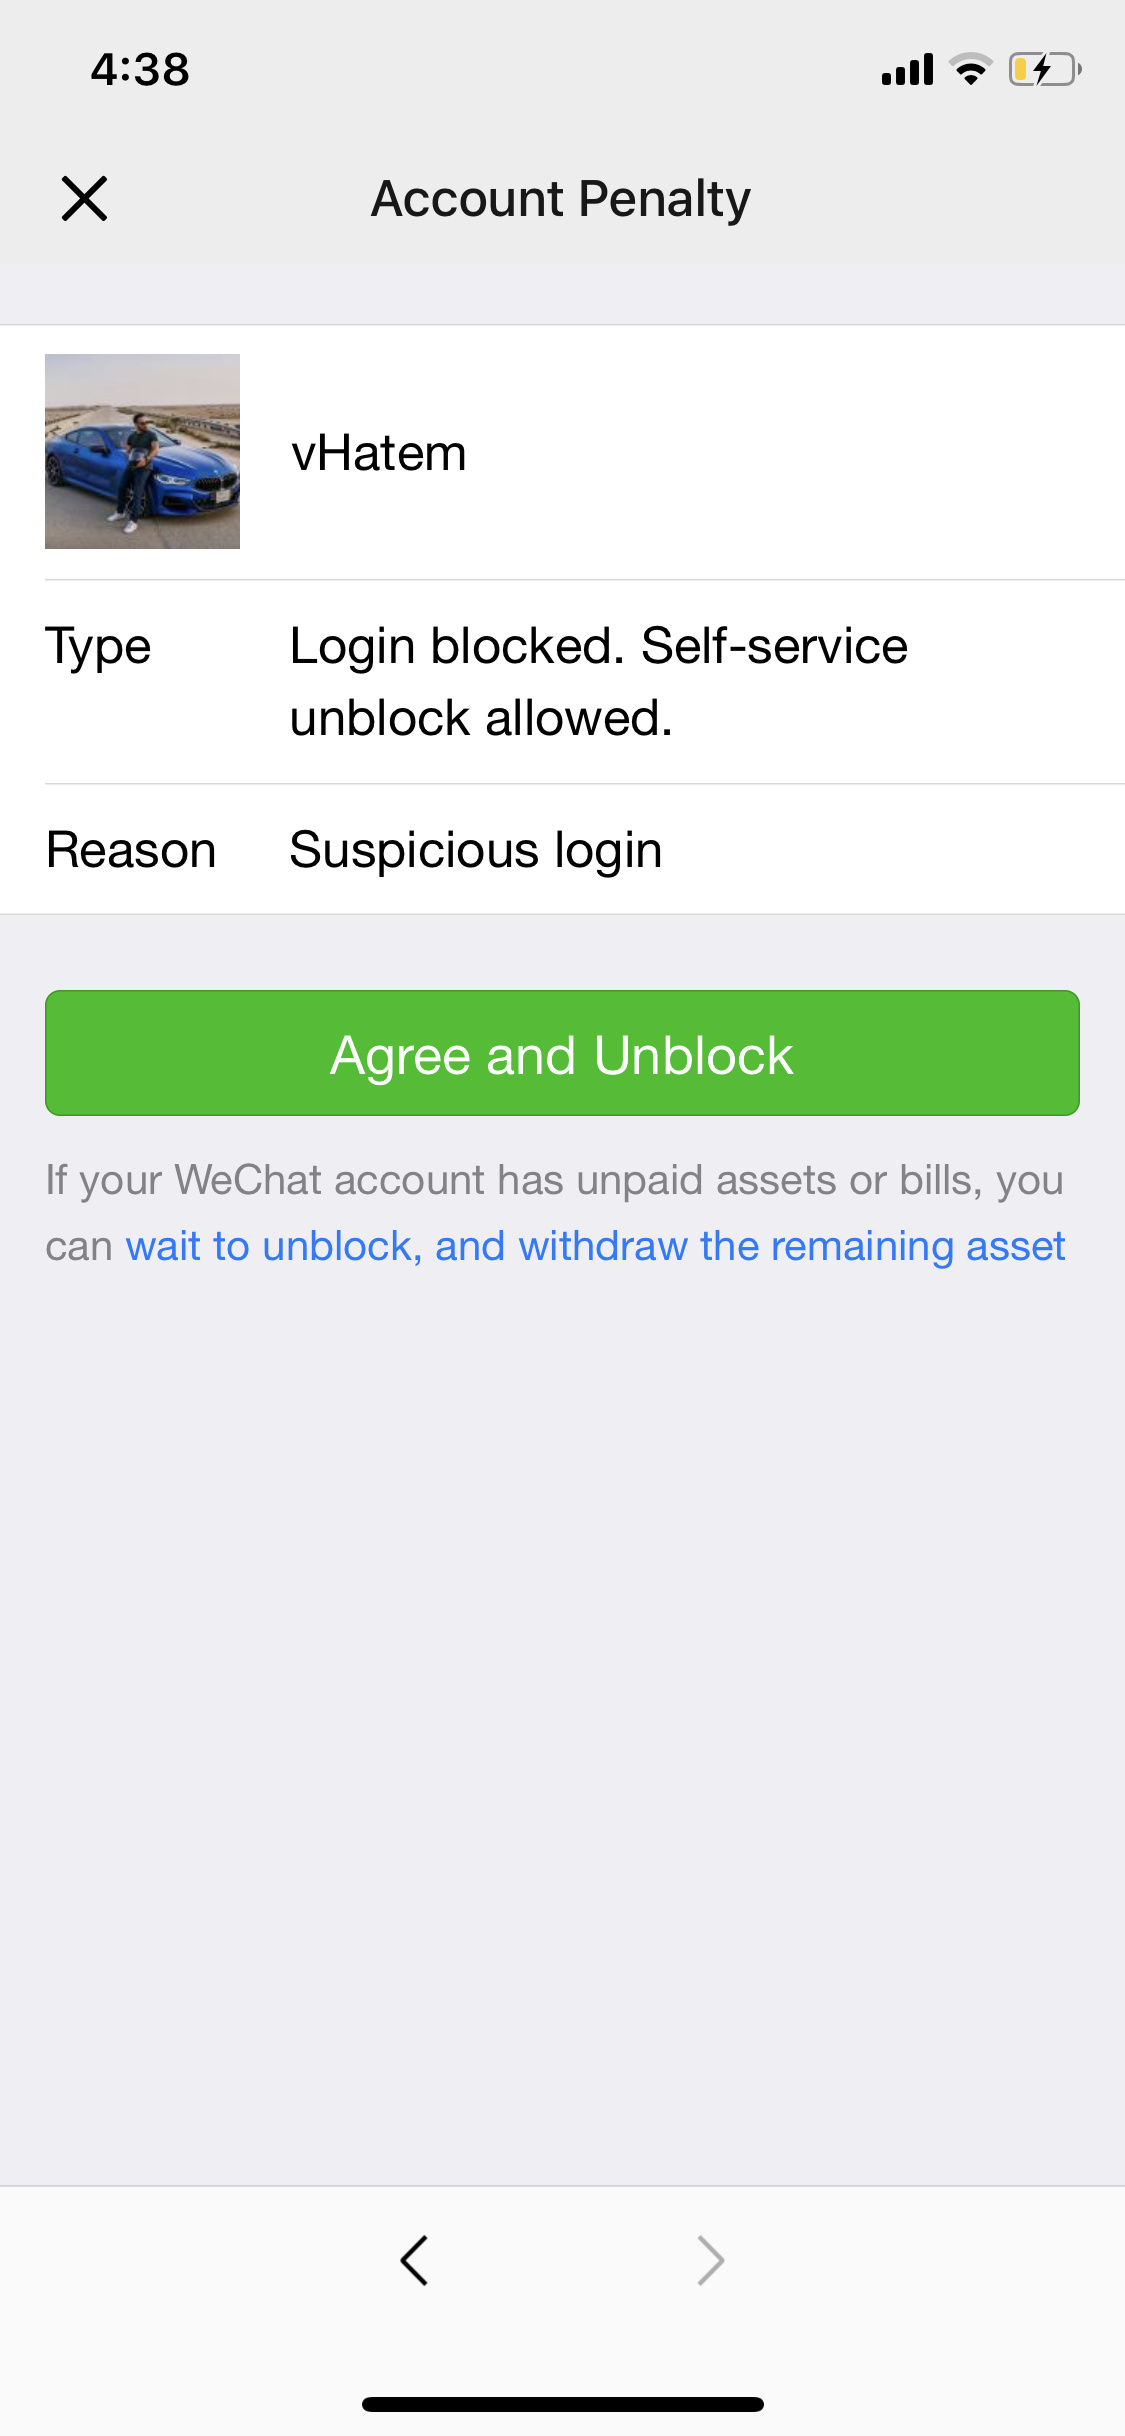 Too attempts wechat many Wechat operation